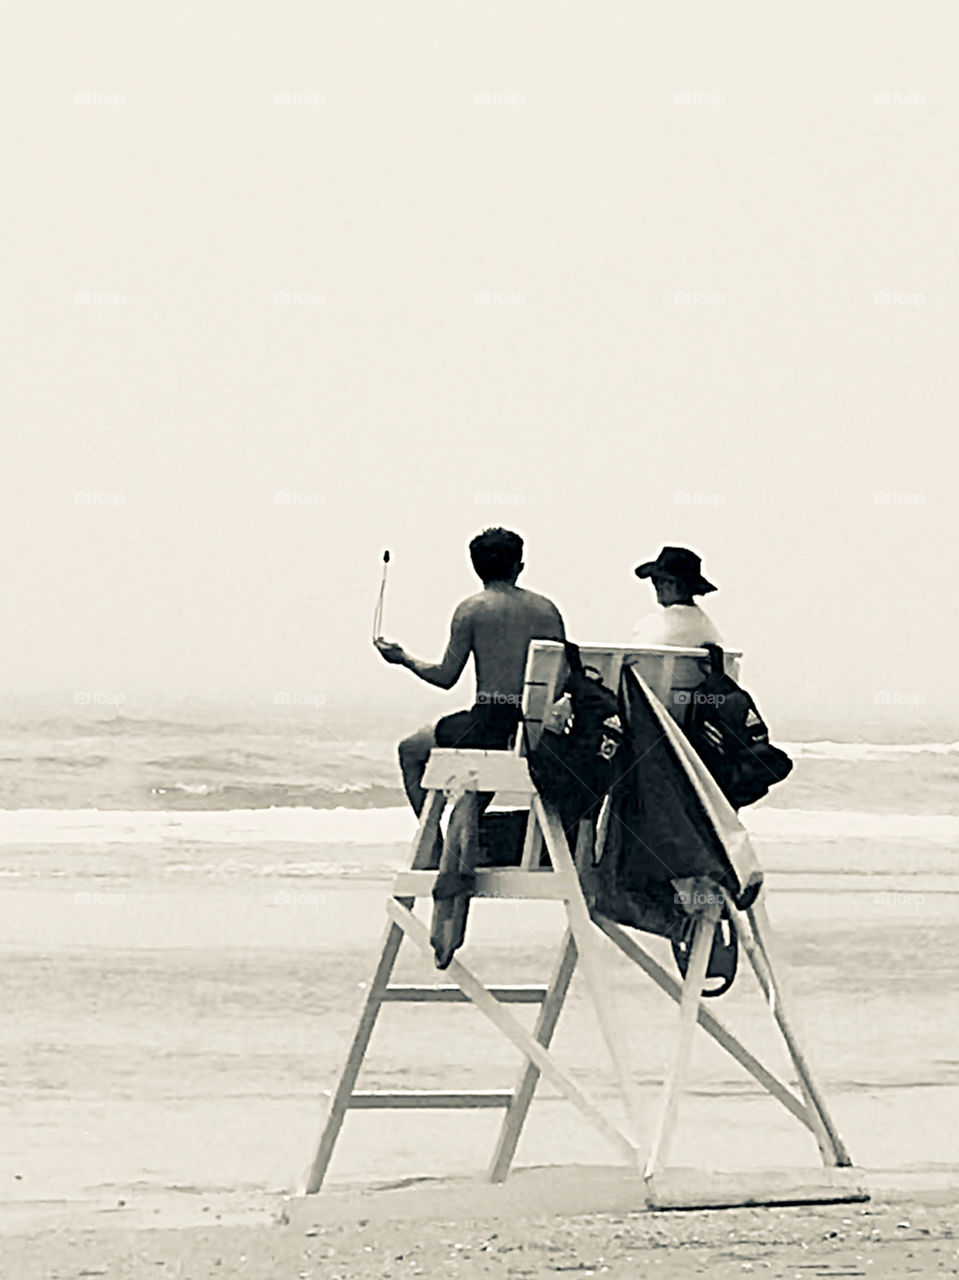 Enjoy the June Lifeguards Watching over Avalon 57th St Beach